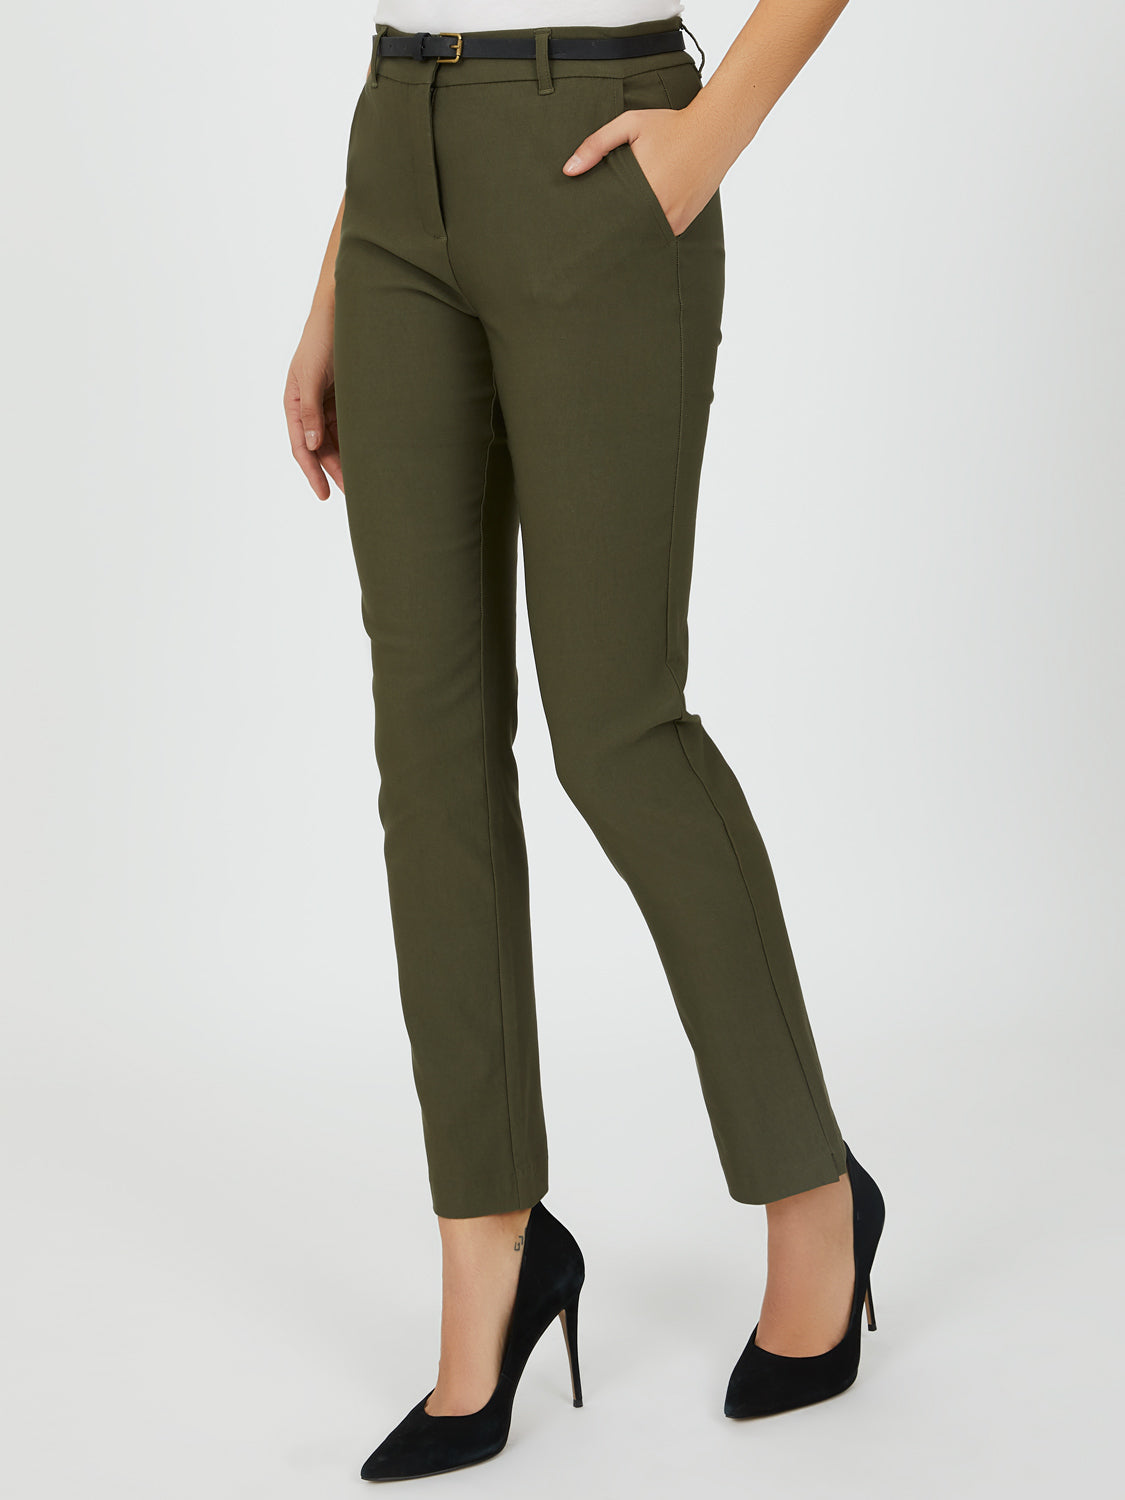 Twill Ankle Length Pant